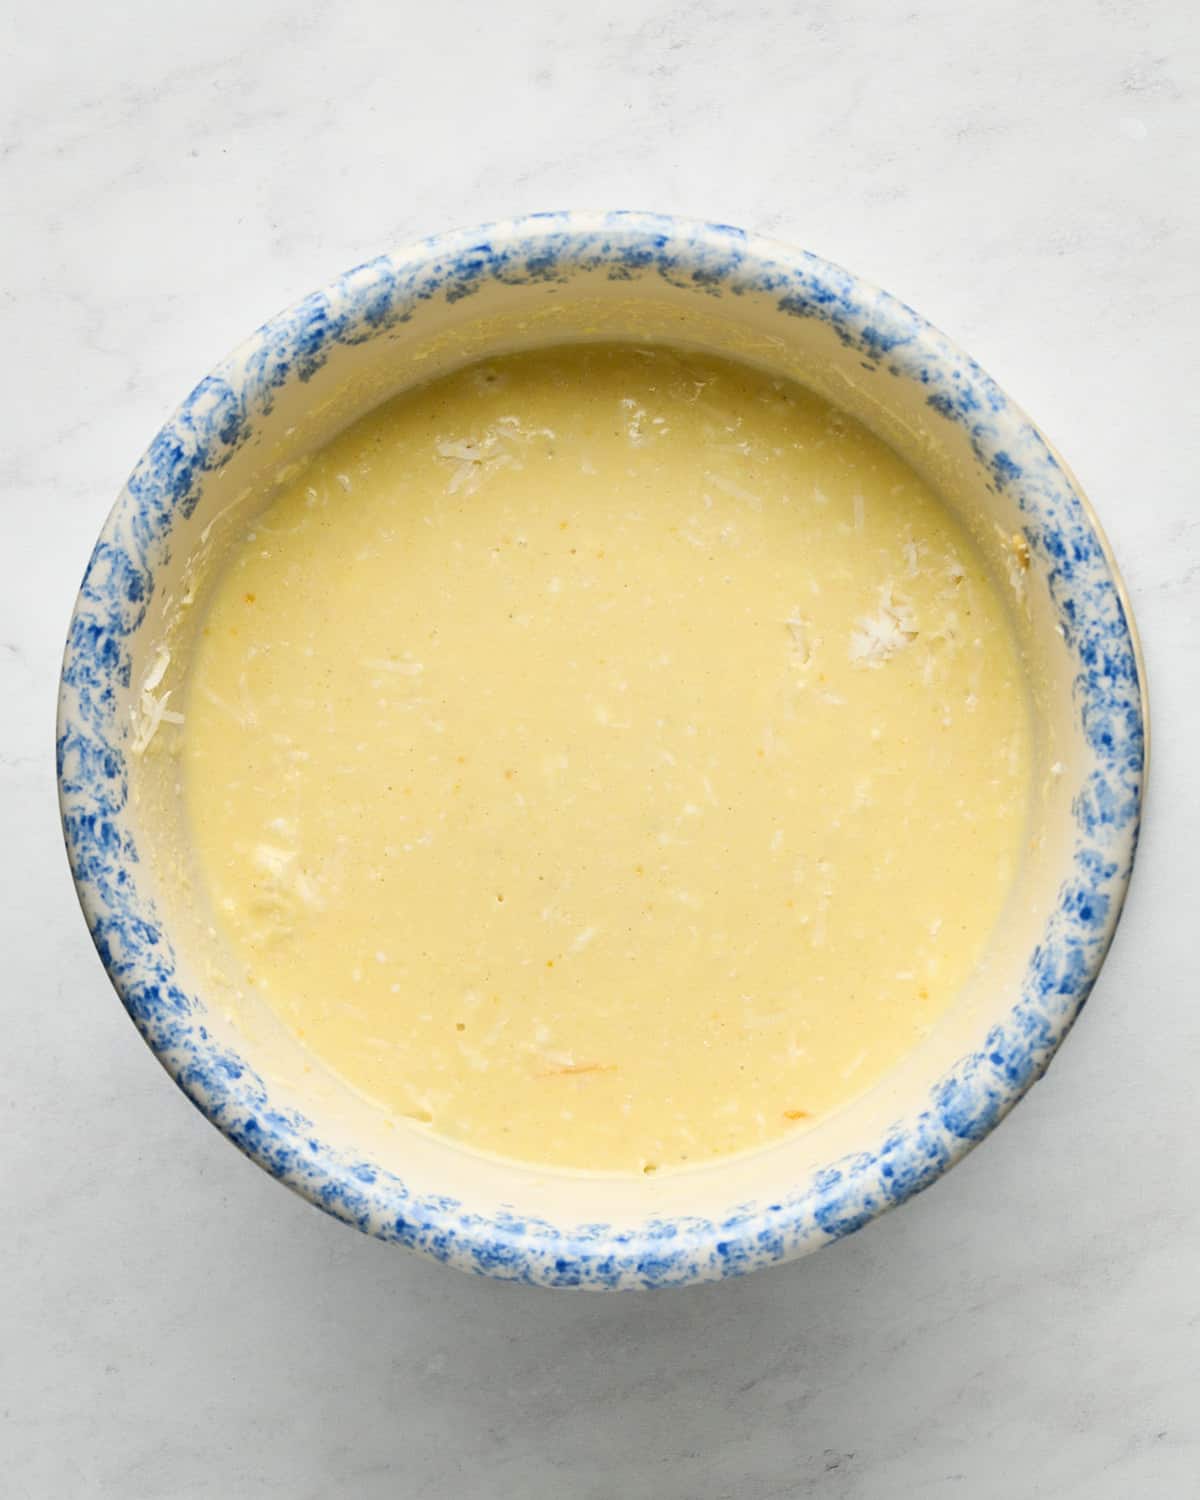 Overhead view of JUST Egg Frittata batter in a blue and white mixing bowl on a marble surface.